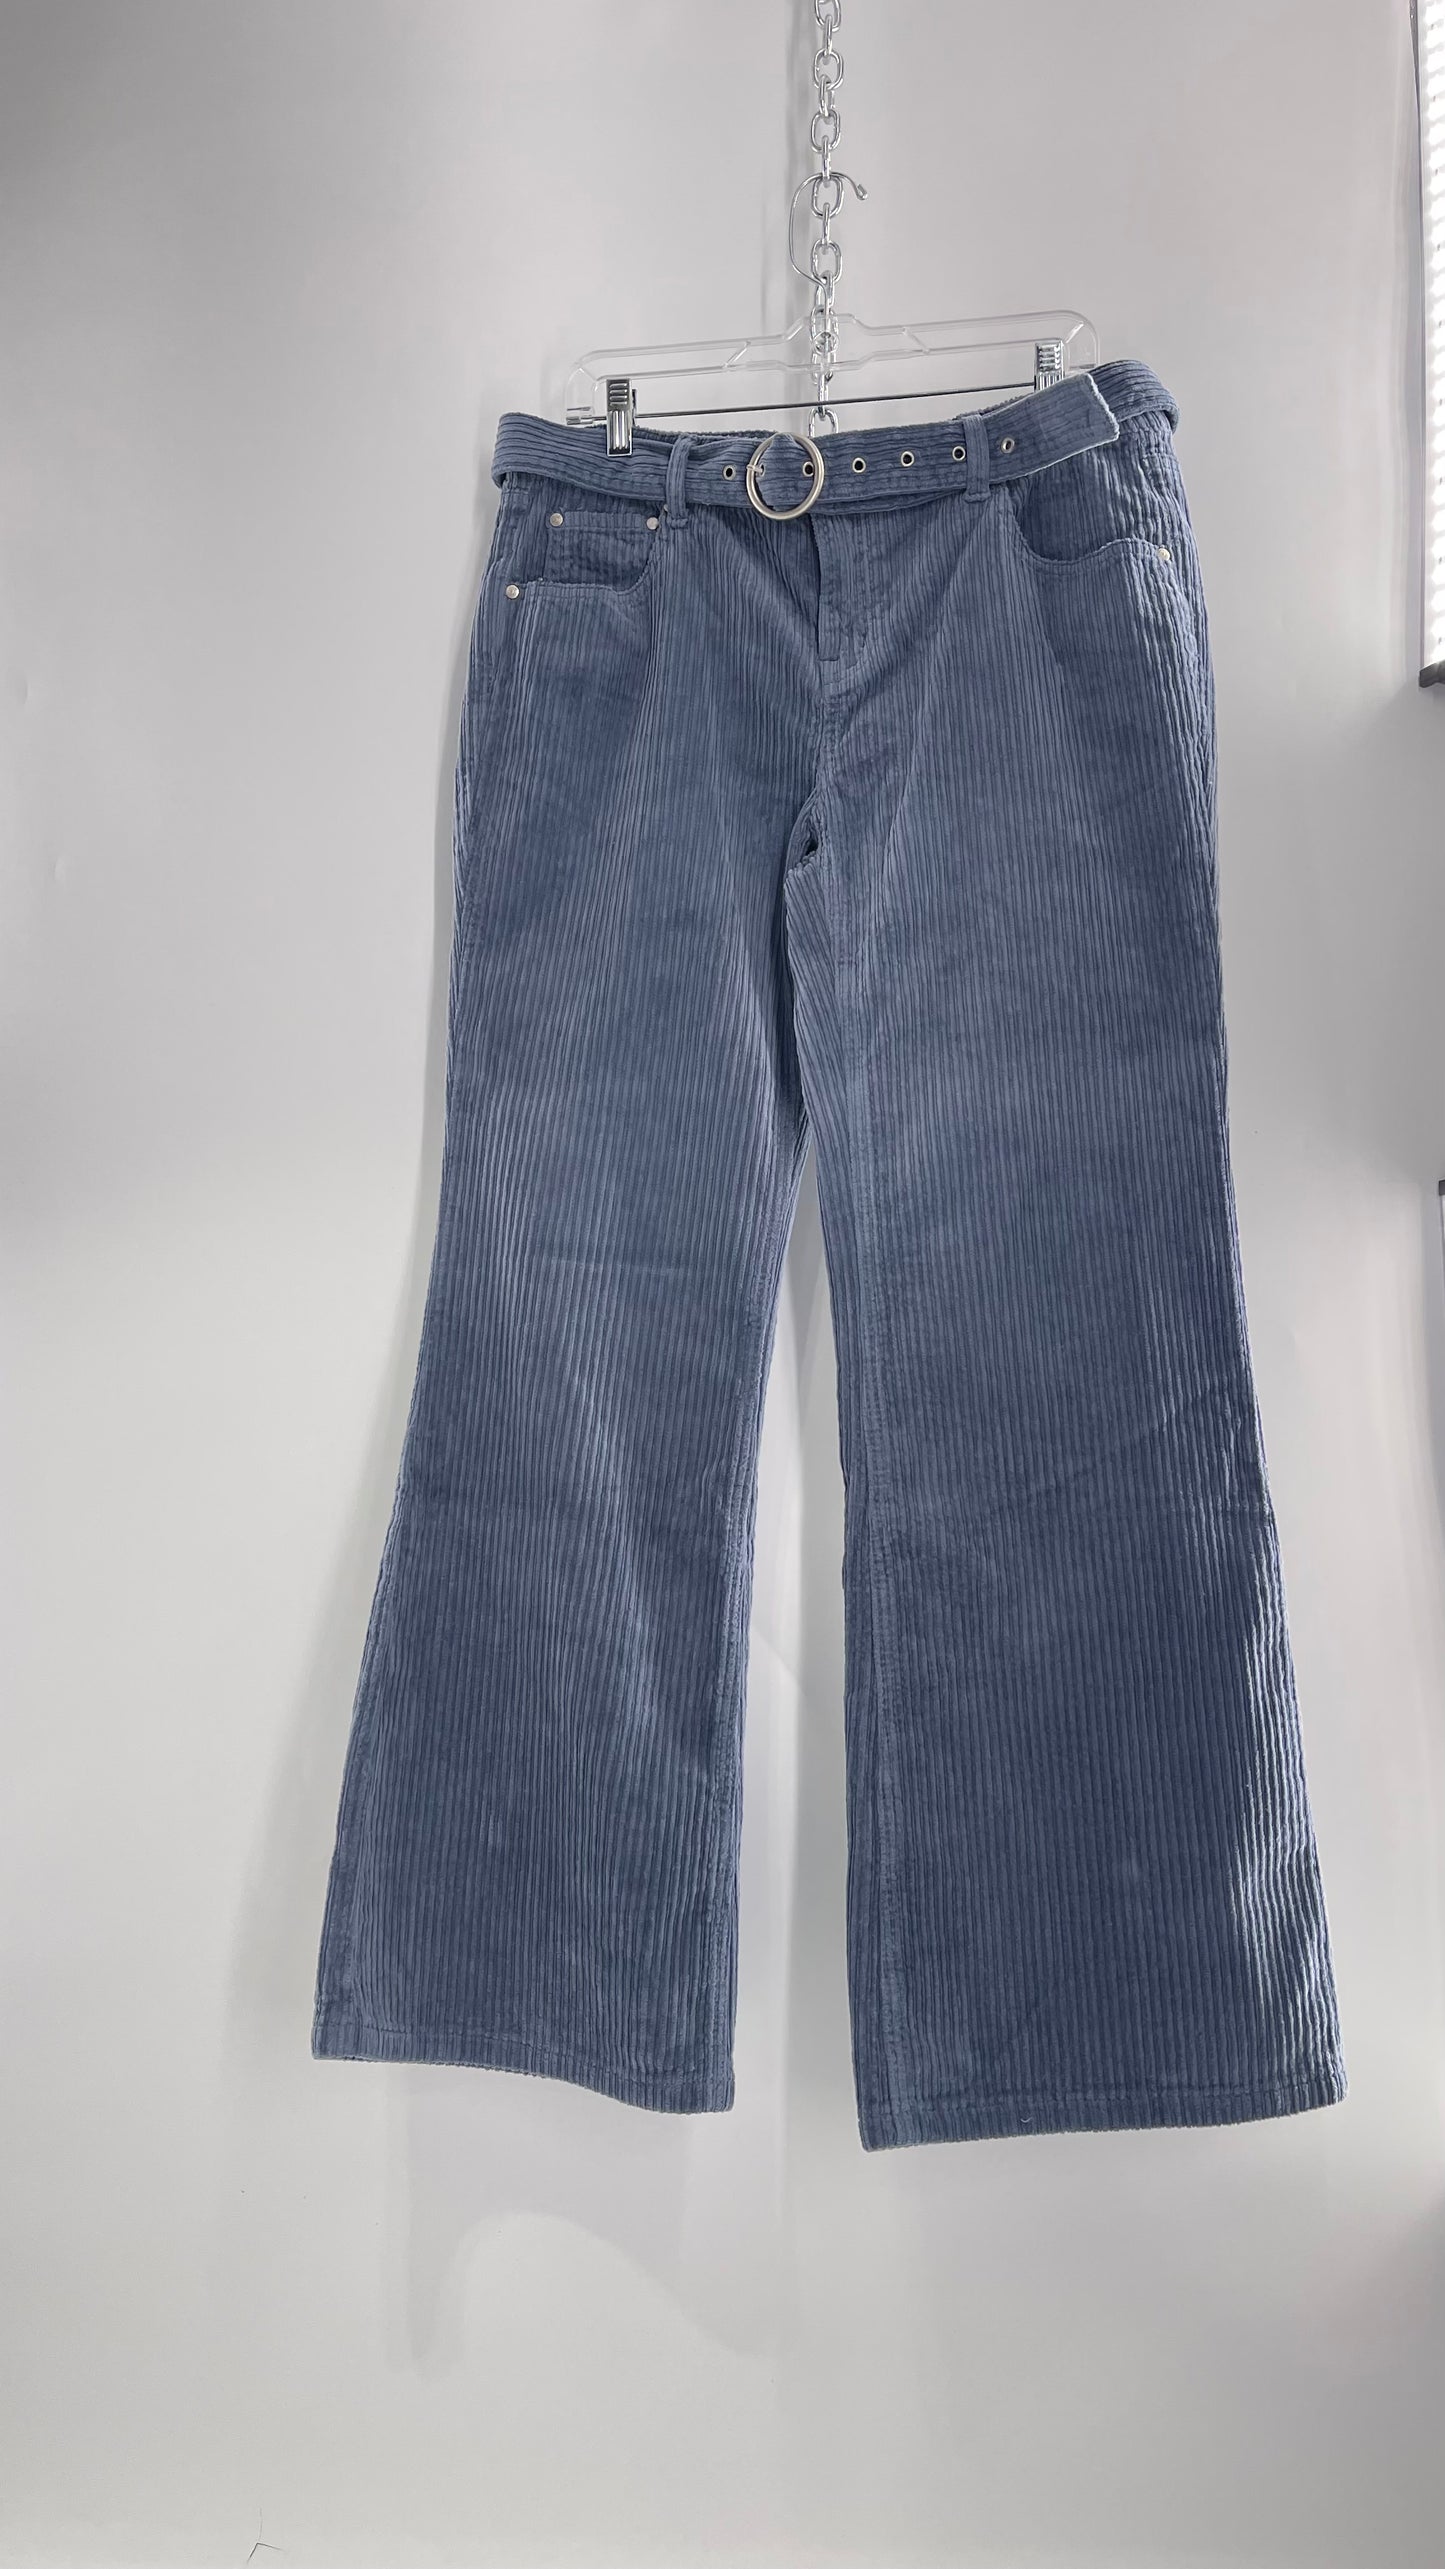 MILK IT Recycled Powder Blue Corduroy Low Waist Grommet Buckle Folk Jean with Tags Attached (16)